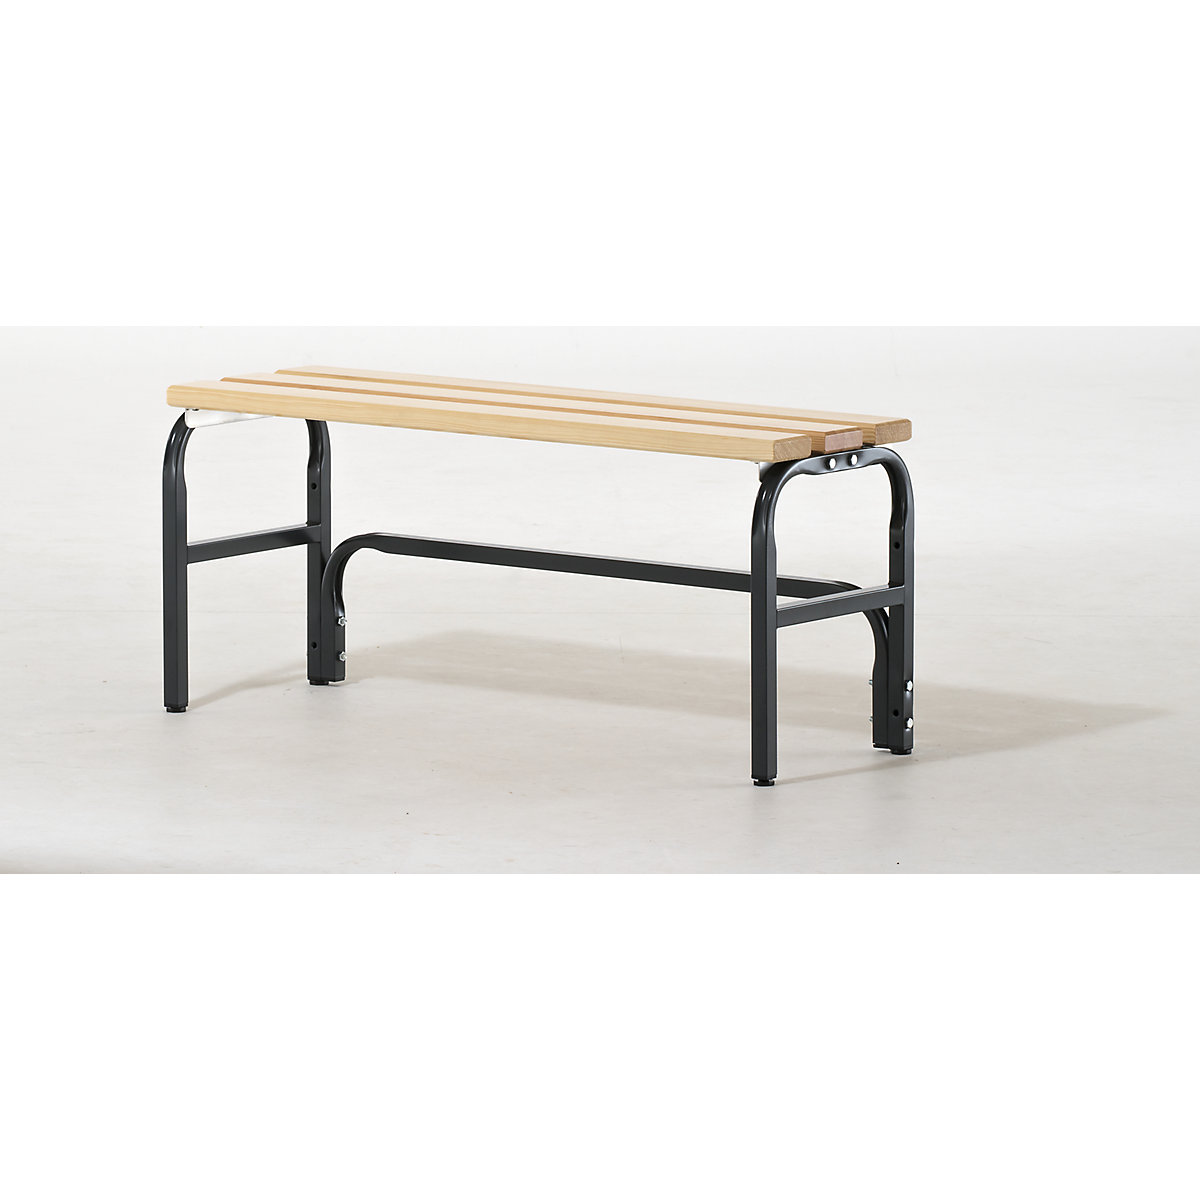 Sypro – Cloakroom bench, single sided, length 1015 mm, charcoal